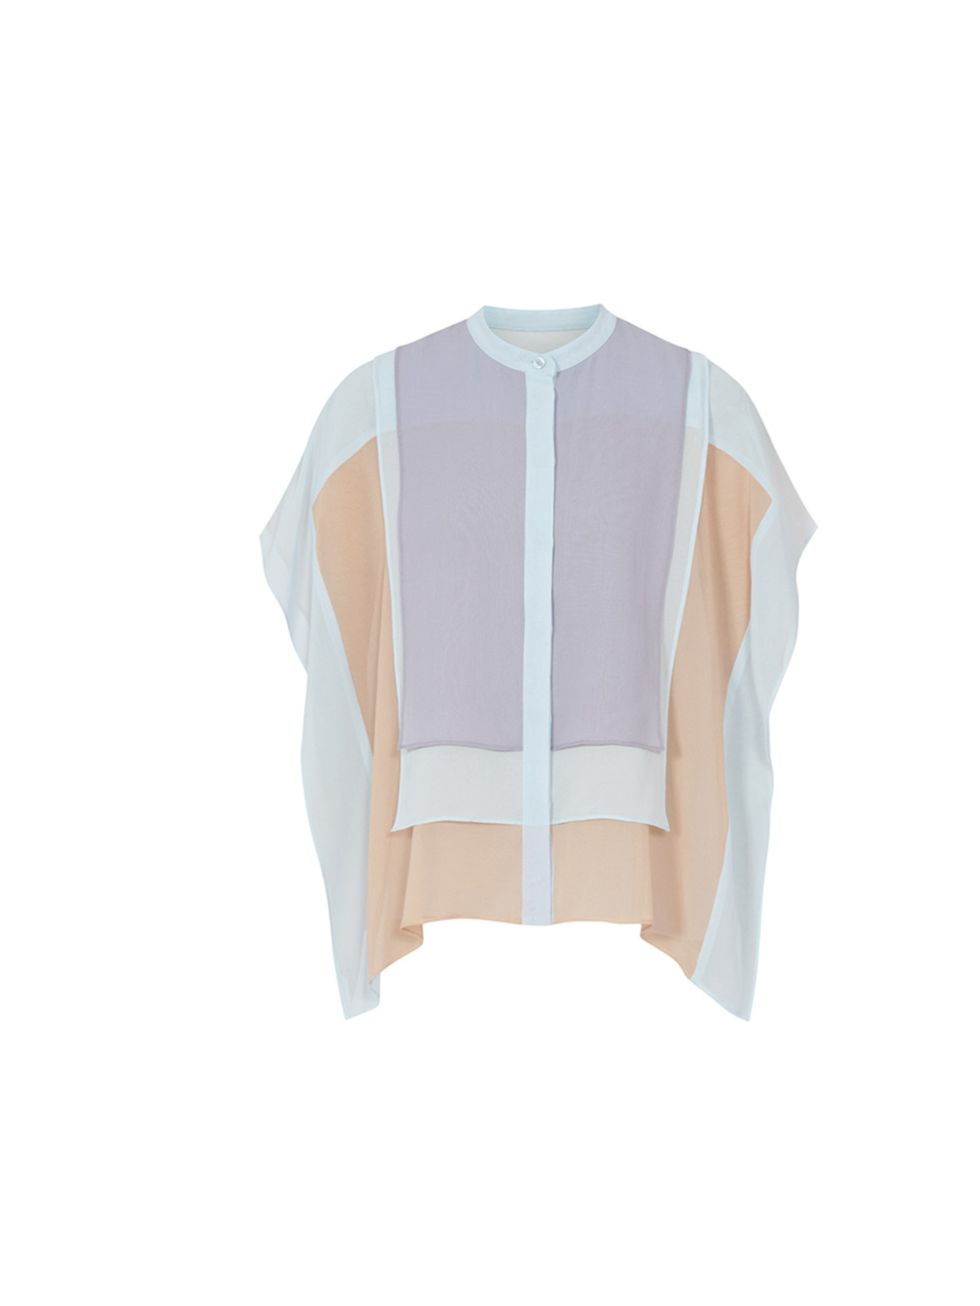 <p>Catwalk style with a high street price tag, head to Reiss this week to snap up this colourful boy-meets-girl shirt... <a href="http://www.reiss.com/womens/womens-new-arrivals/jade/pale-blue/">Reiss</a> layered shirt, £120</p>